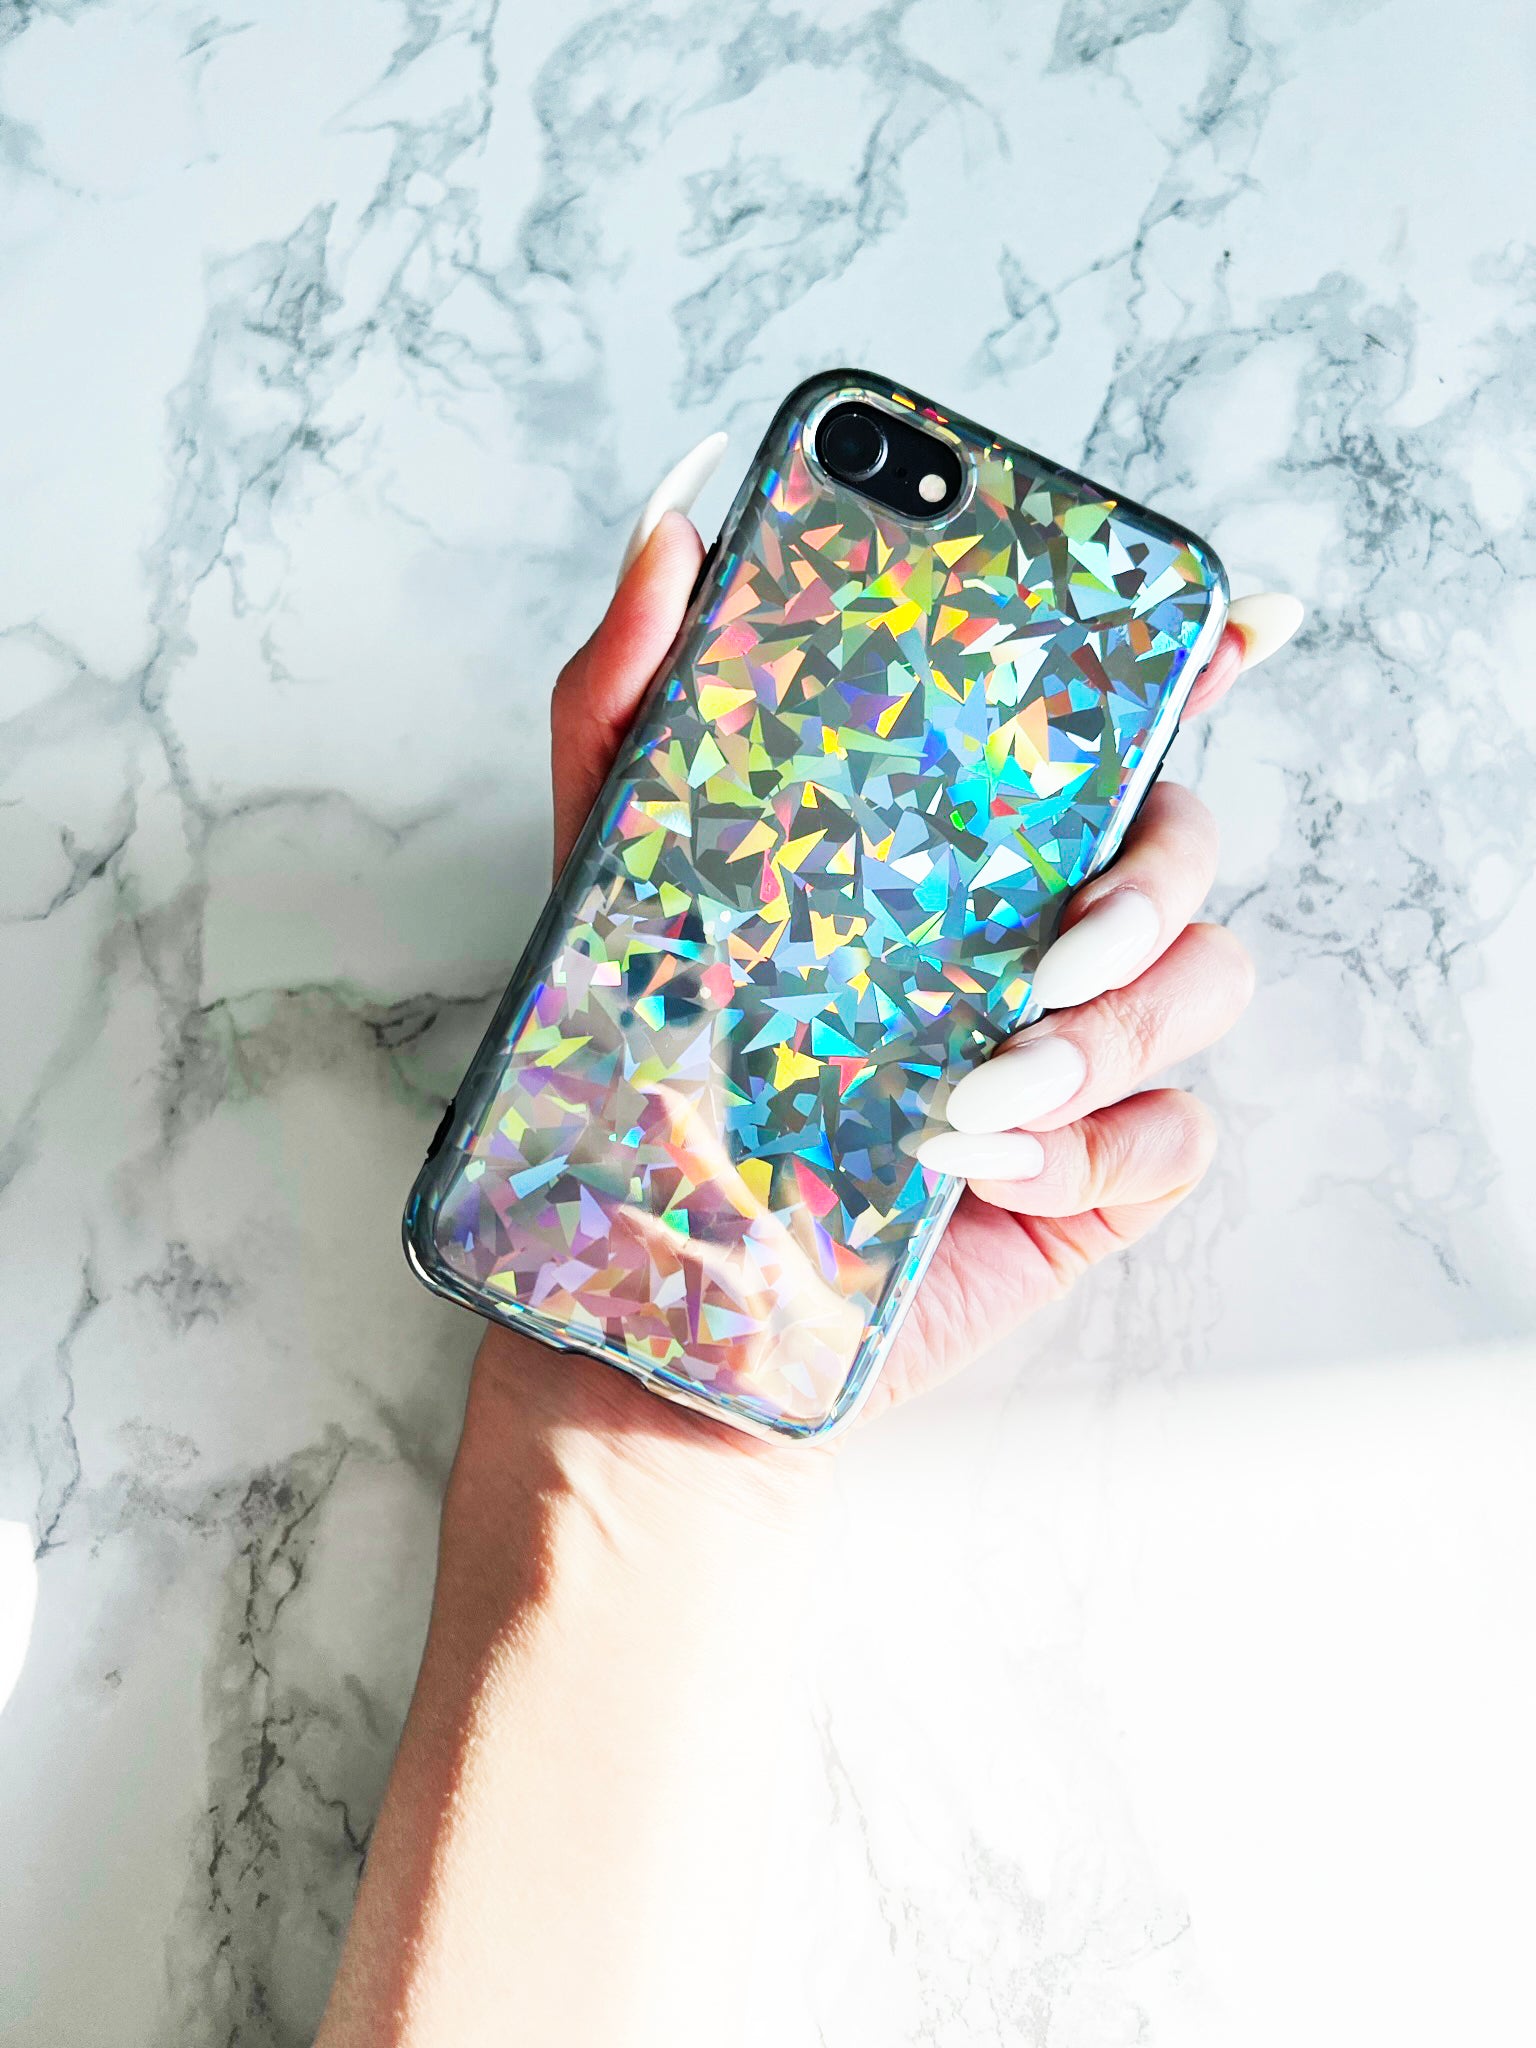 Holding Up KokoLoveCo Laser Focus Holographic iPhone Case with marble tabletop background